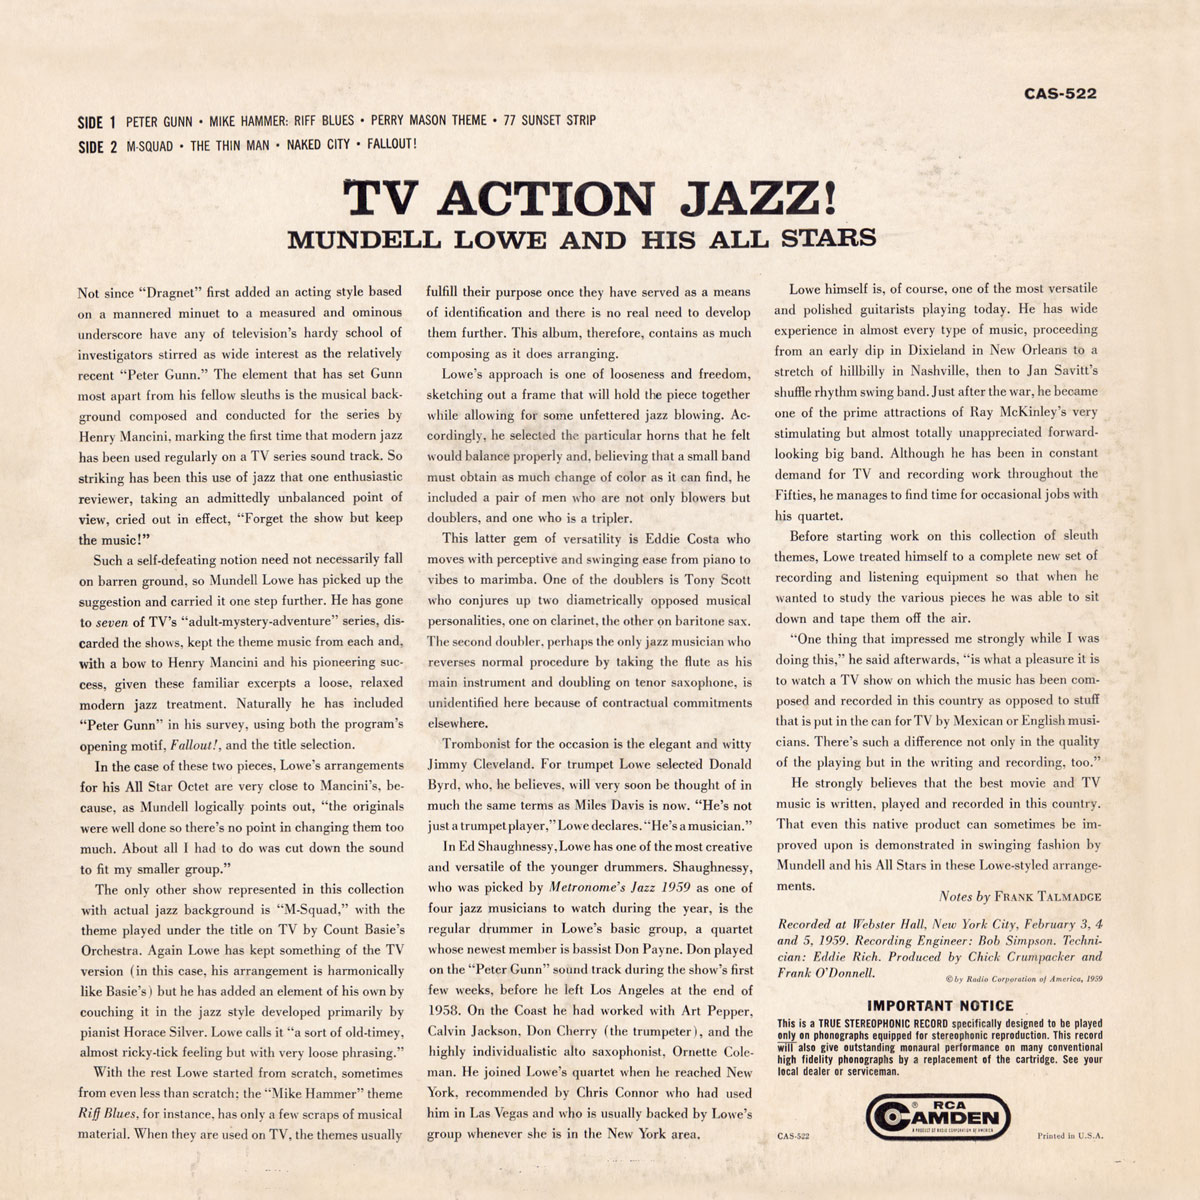 Mundell Lowe And His All Stars ‎– TV Action Jazz! (1959) - back cover